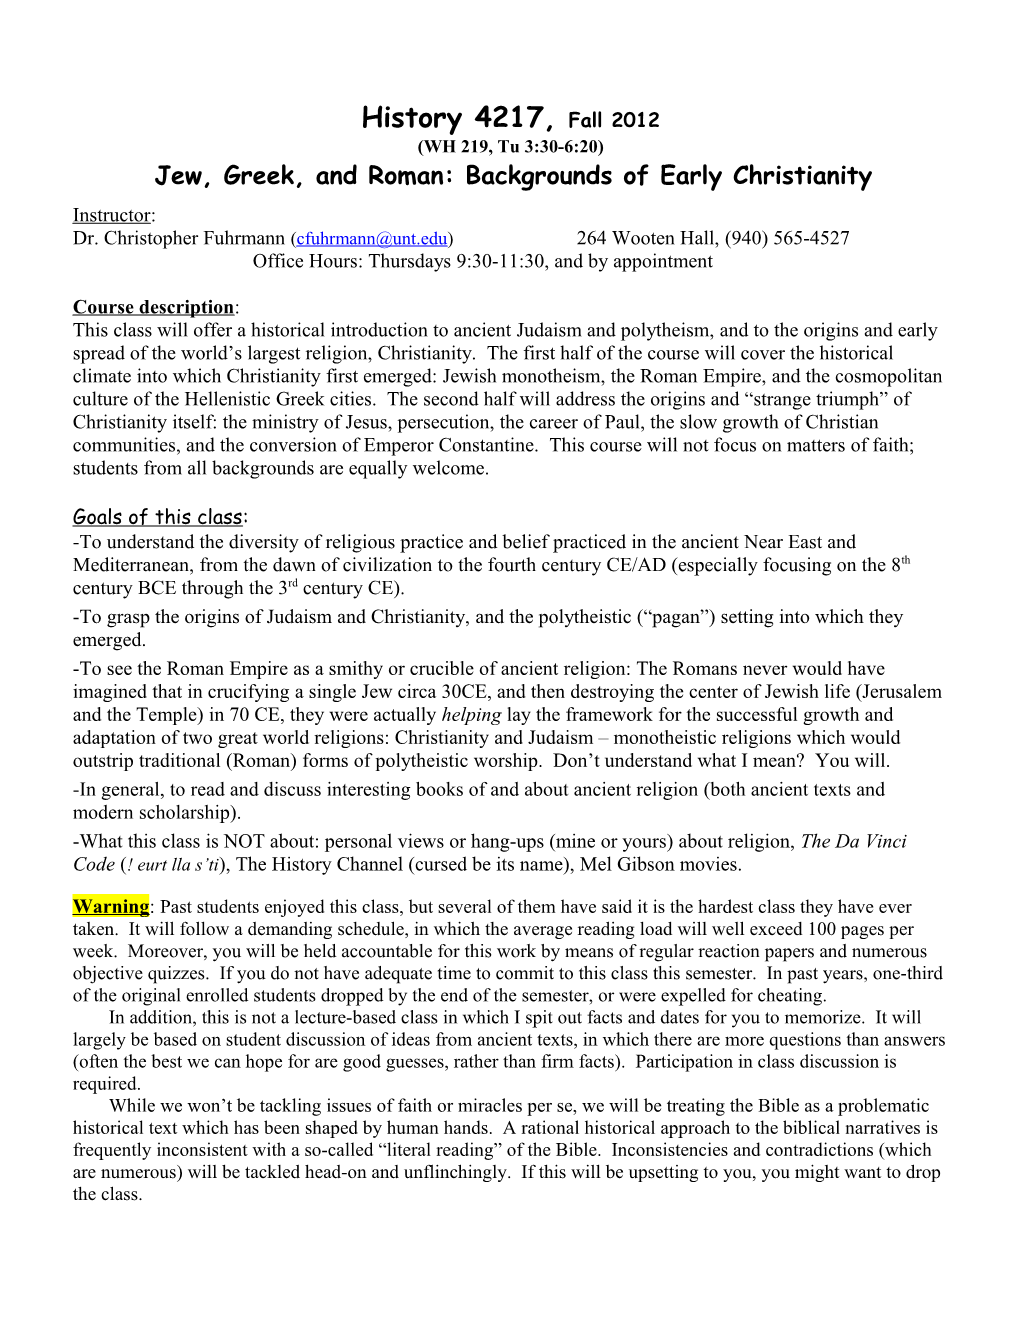 Jew, Greek, and Roman: Backgrounds of Early Christianity